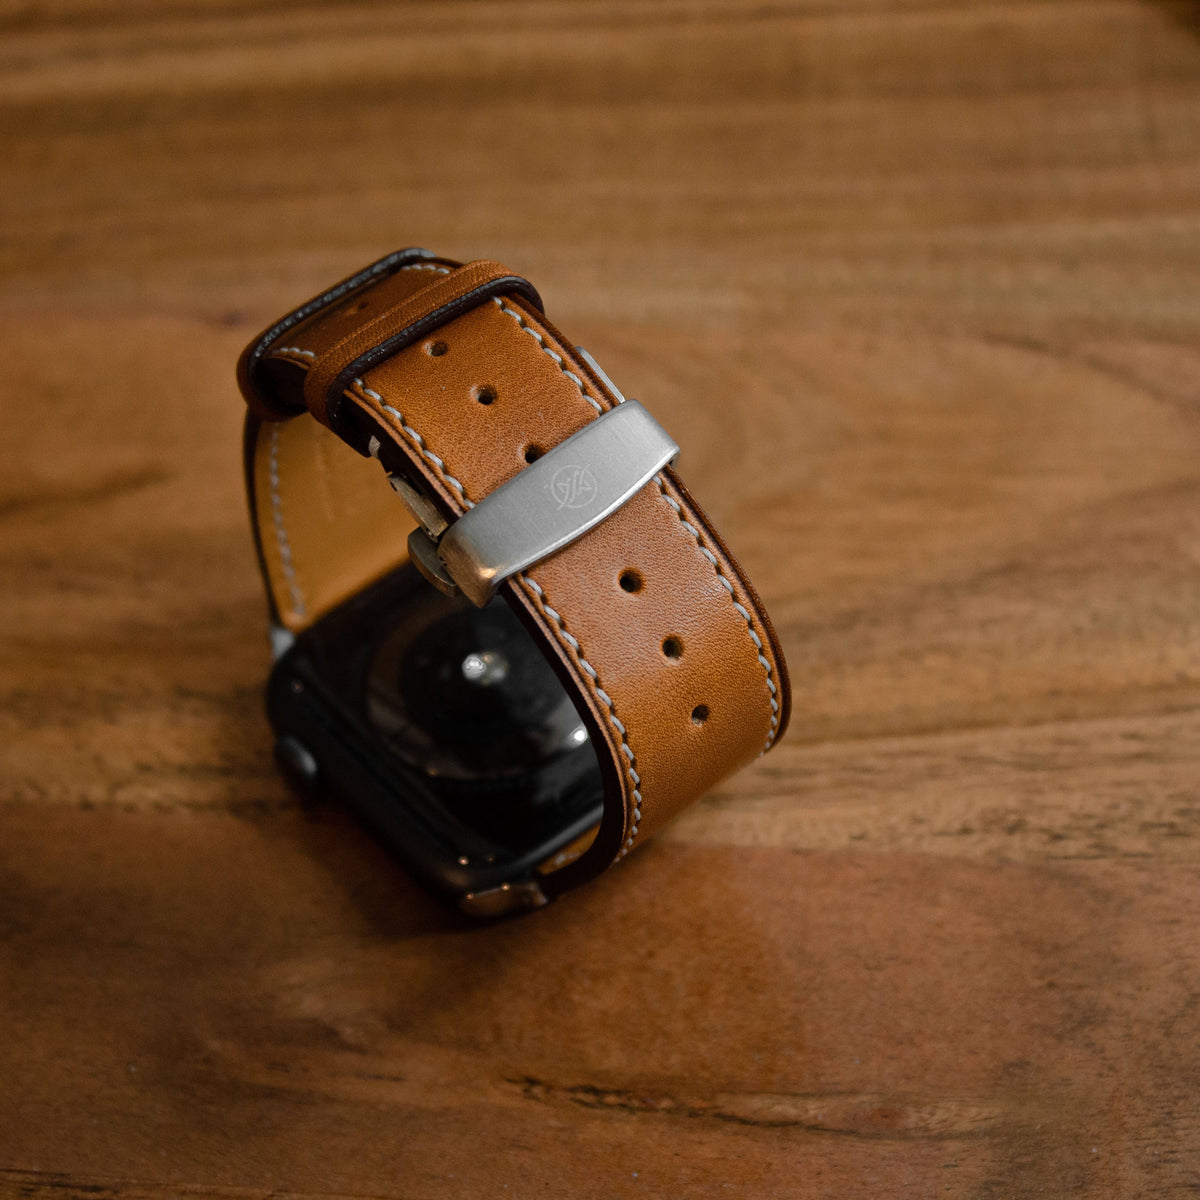  mxiixnai Leather Bands Compatible with Apple Watch